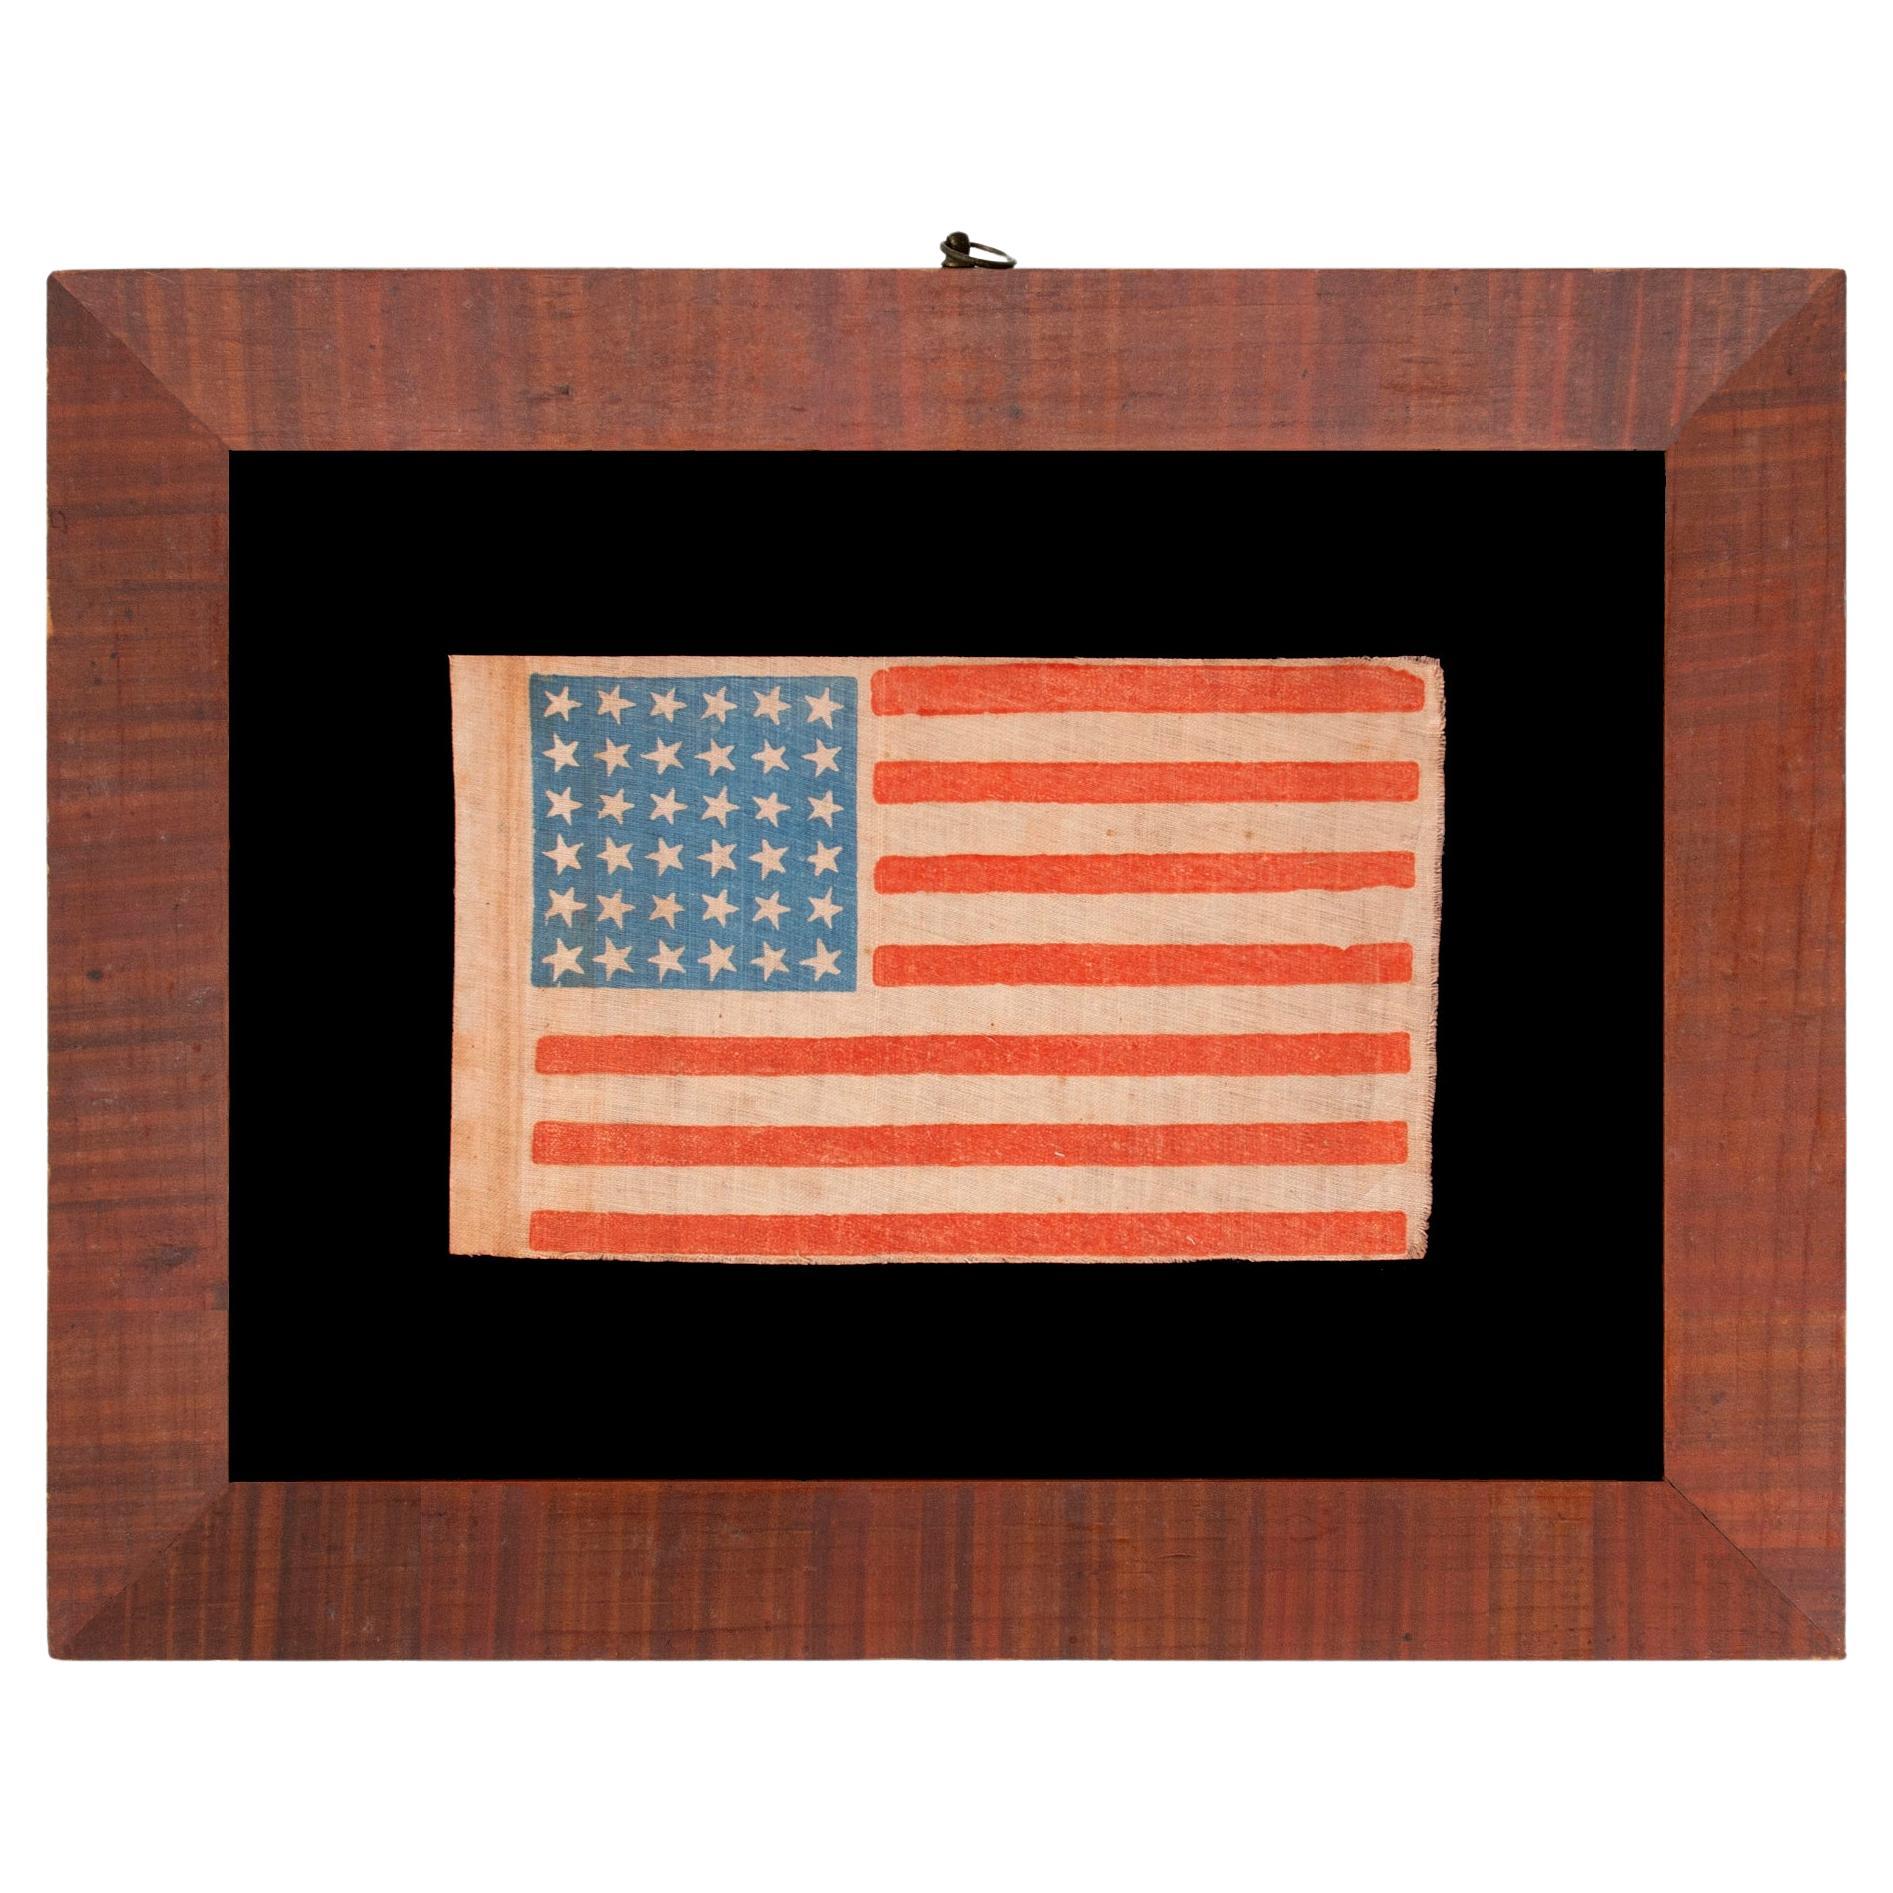 36 Star Antique American Parade Flag, Nevada Statehood, ca 1864-1867 For Sale